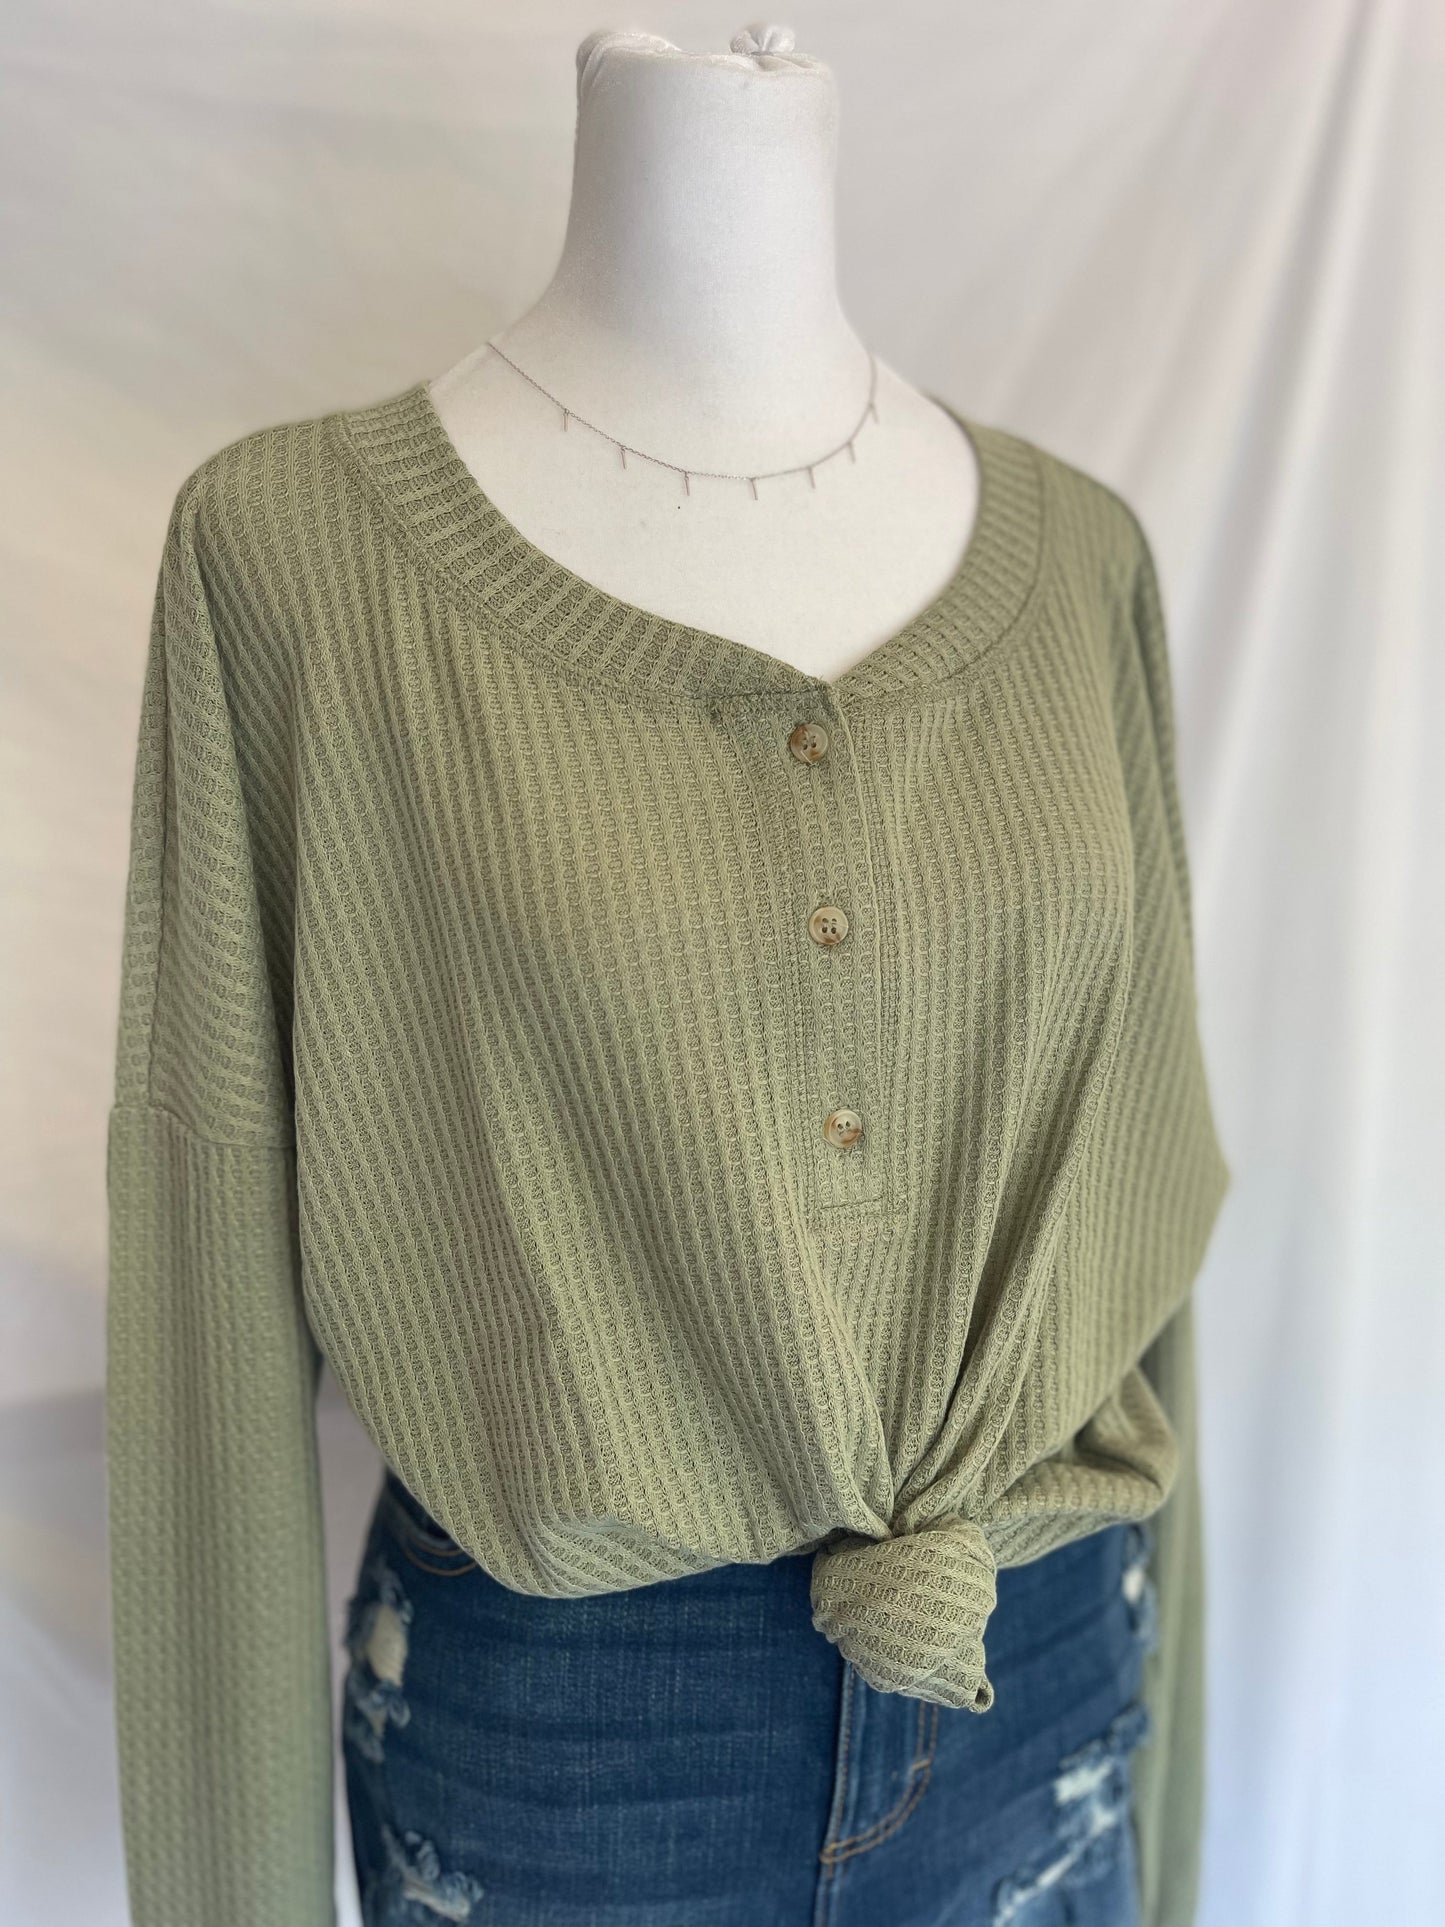 Run Away With Me Top - Olive